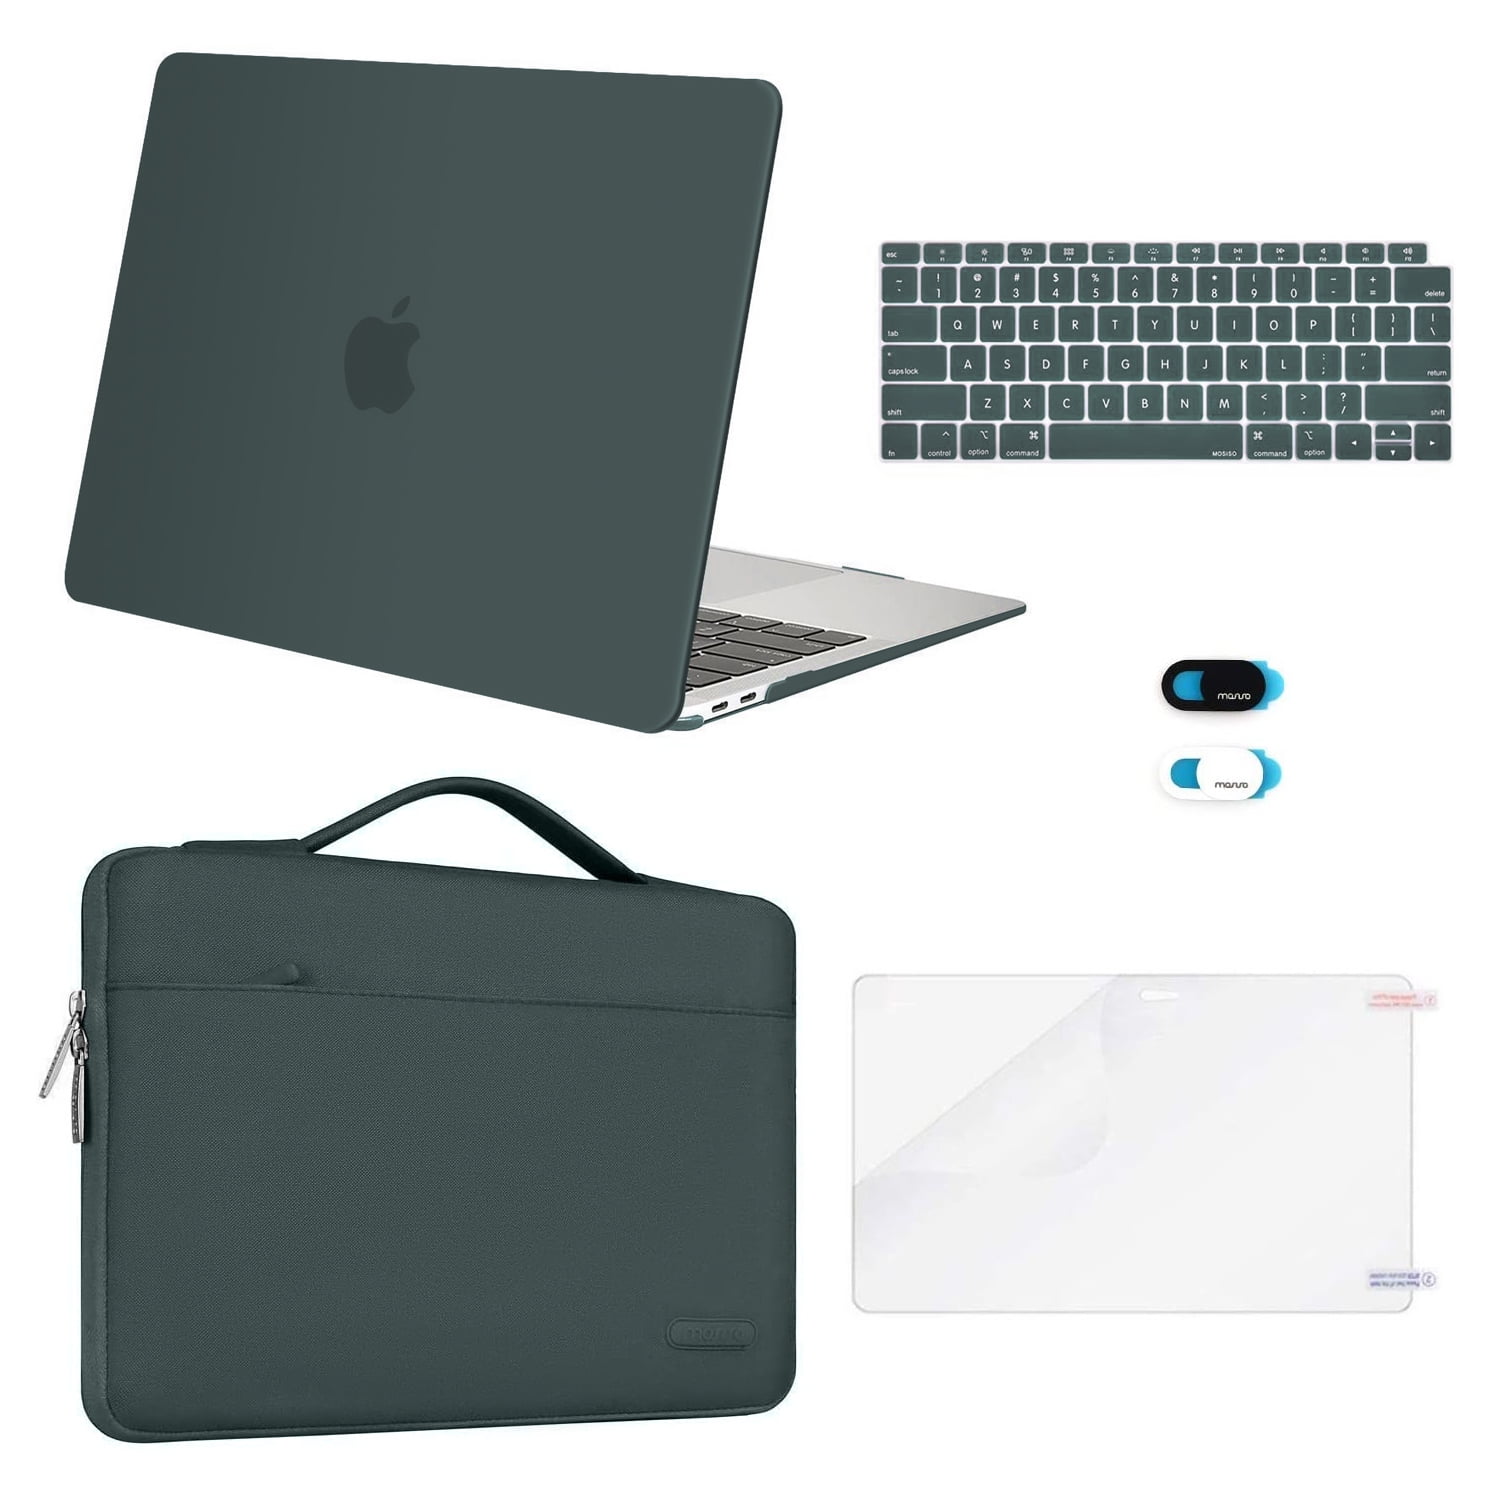 MOSISO MacBook Air 13 inch Case 2019 2018 Release A1932 with Retina Display Plastic Hard Shell Case & Keyboard Cover Skin Only Compatible with MacBook Air 13 with Touch ID Space Gray 